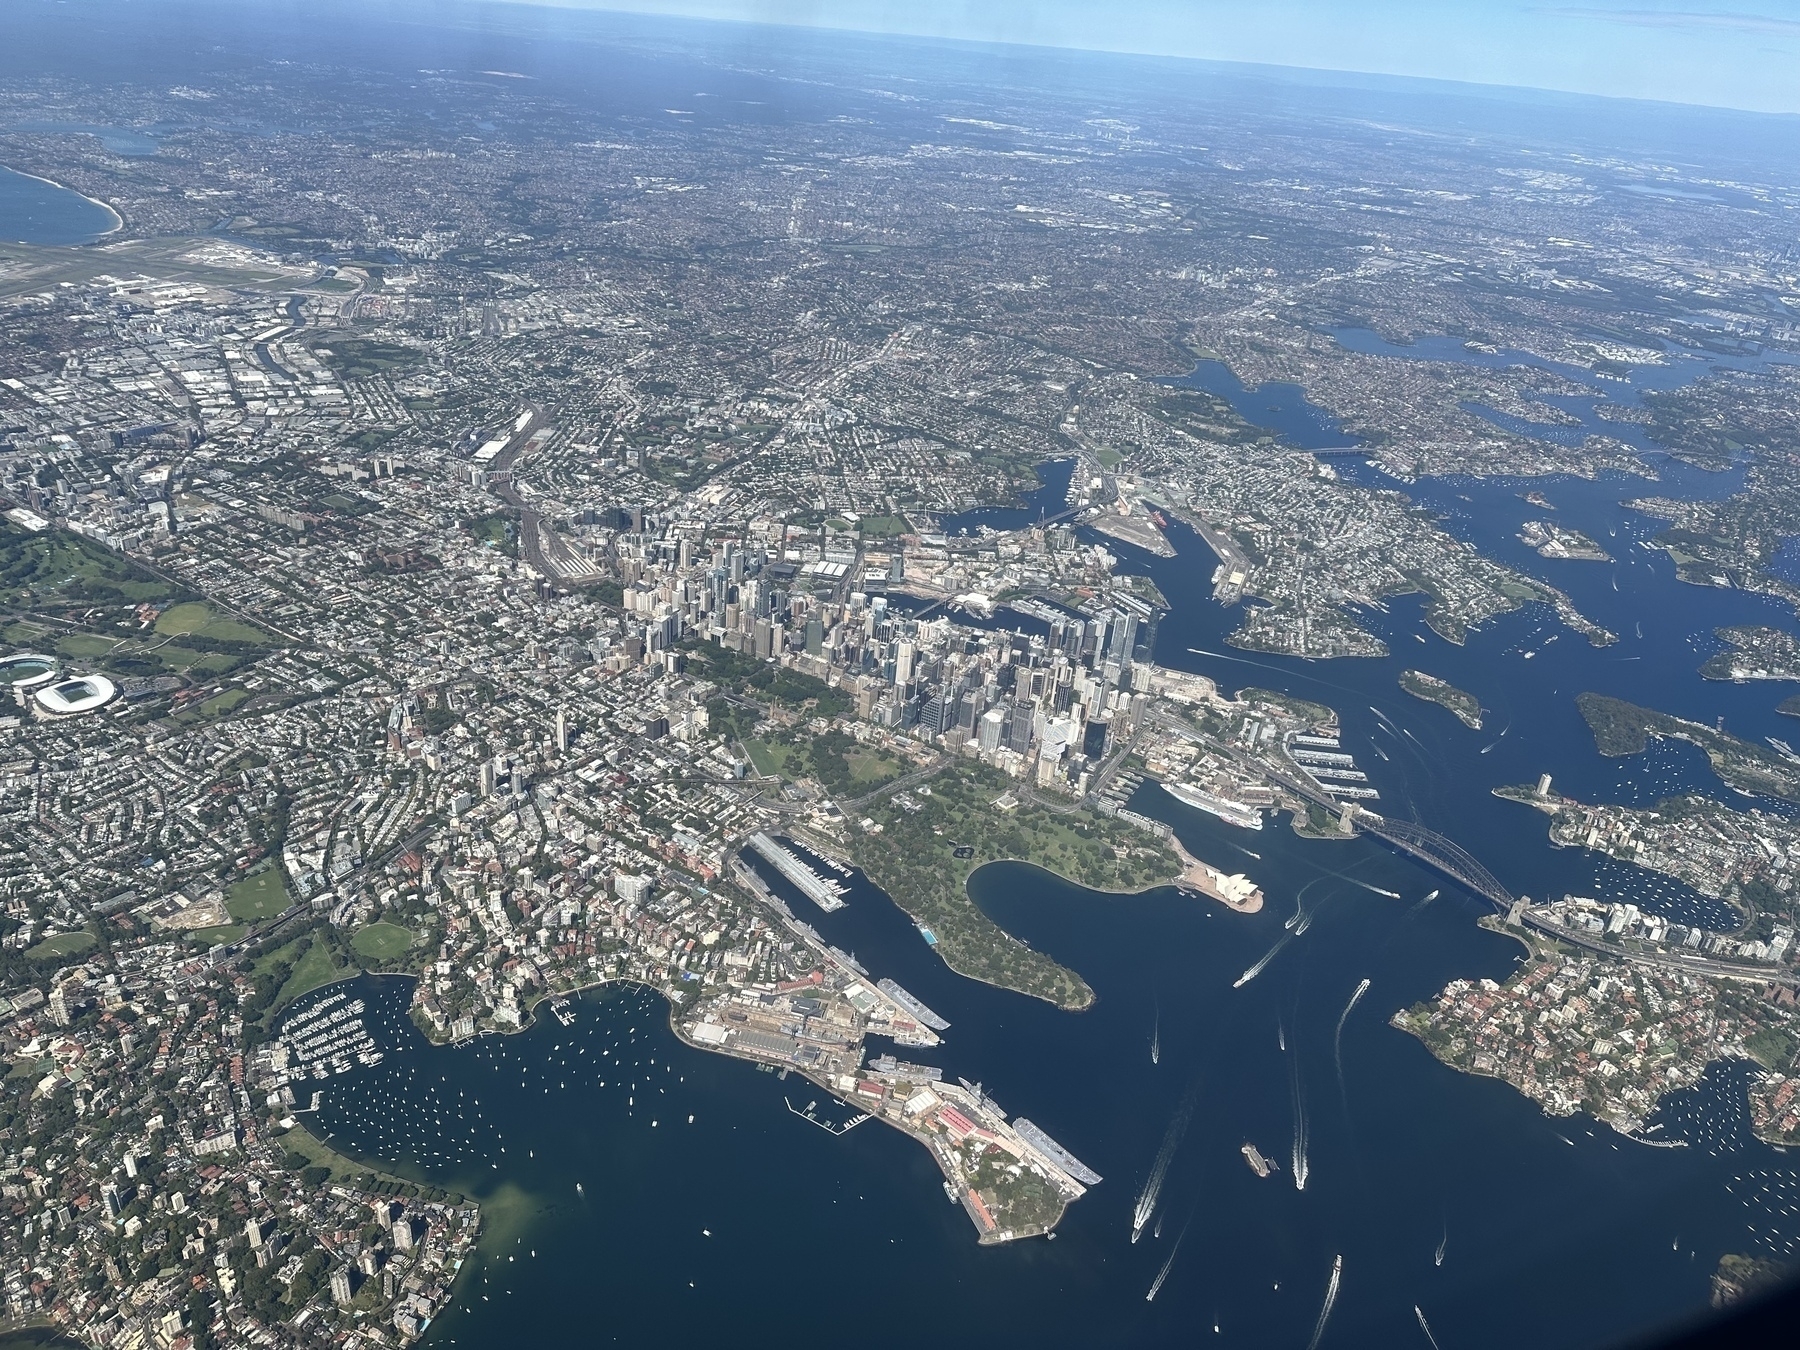 An aerial view of Sydney Harbour. The Sydney opera house, harbour bridge, circular quay, a cruise ship and the domain gardens are all visible as is the CBD and surrounds. The harbour is a deep blue and it’s a clear sunny day.